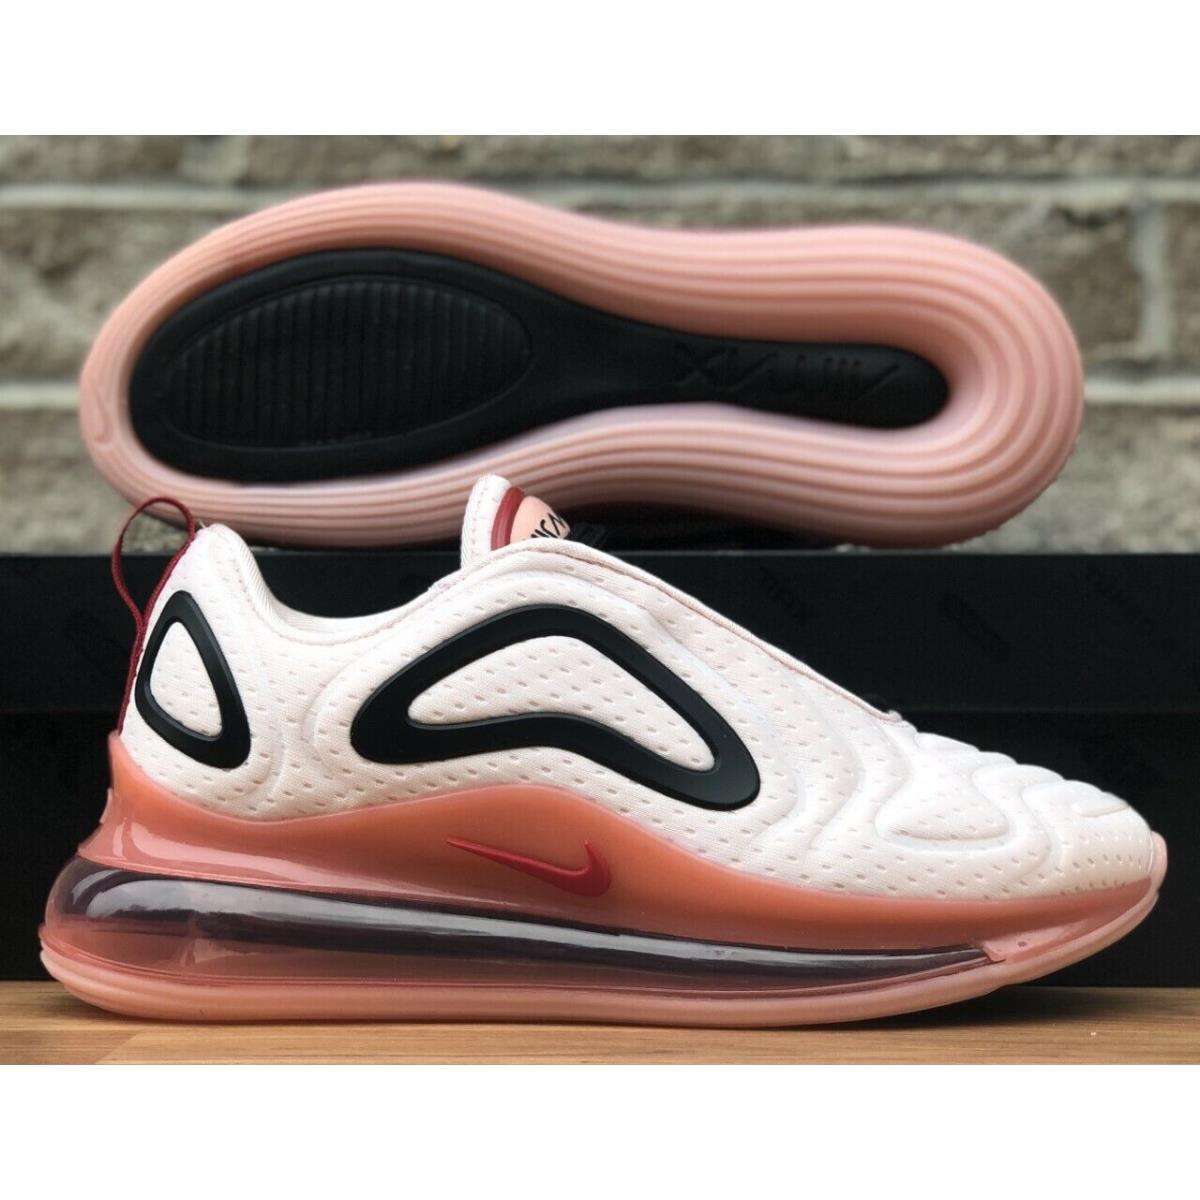 Nike shoes Air Max - Light Soft Pink / Gym Red 3